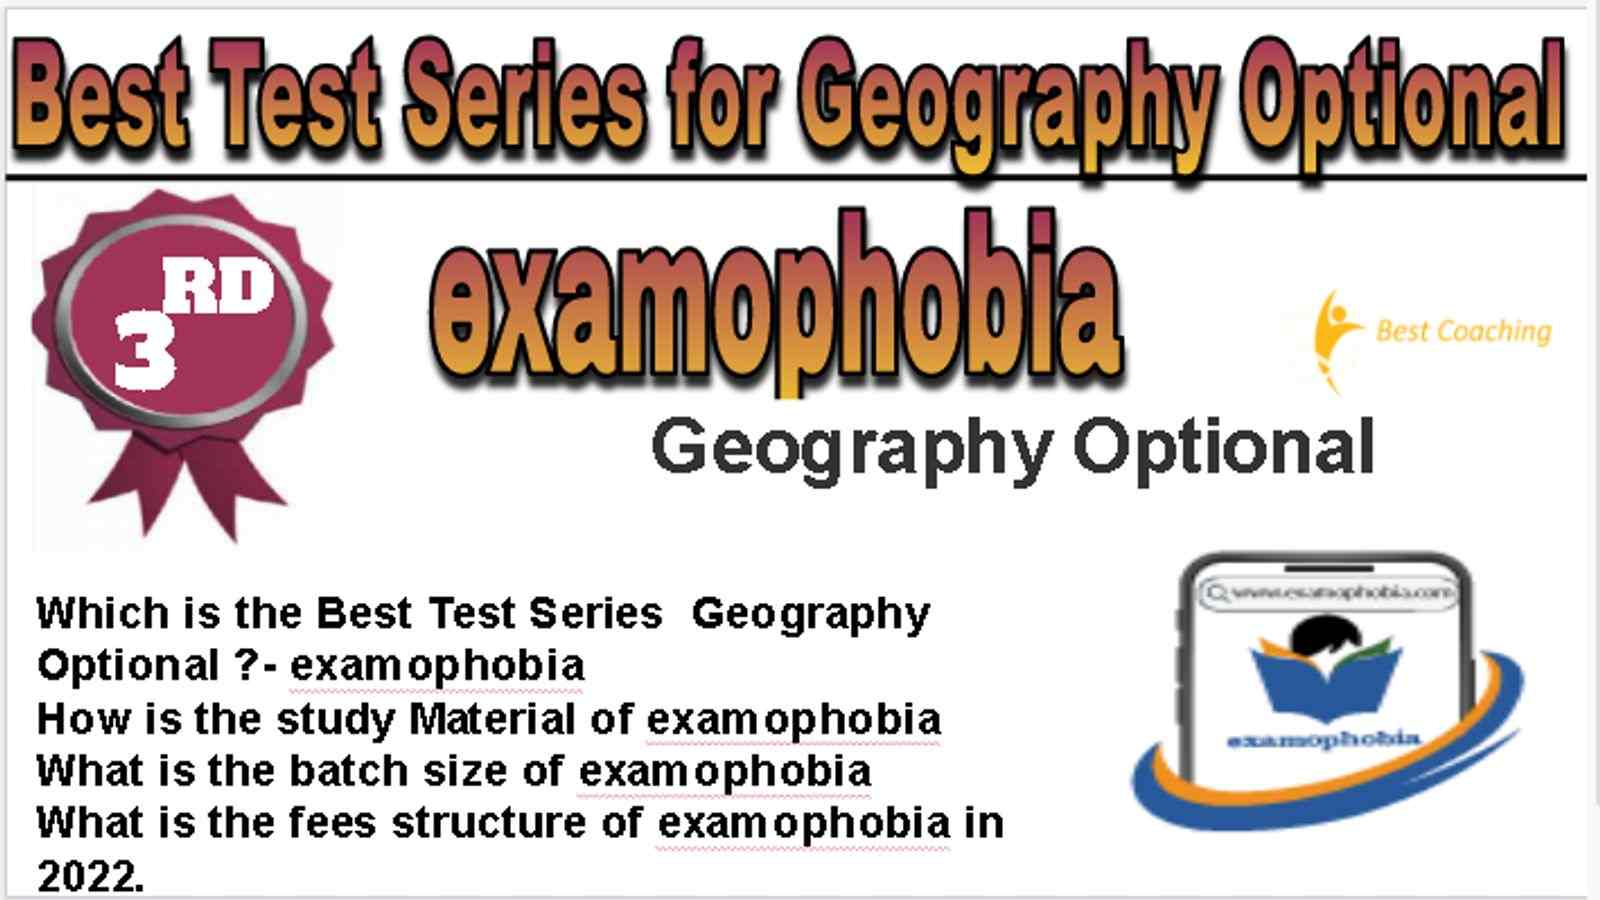 Rank 3 Best Test Series for Geography Optional